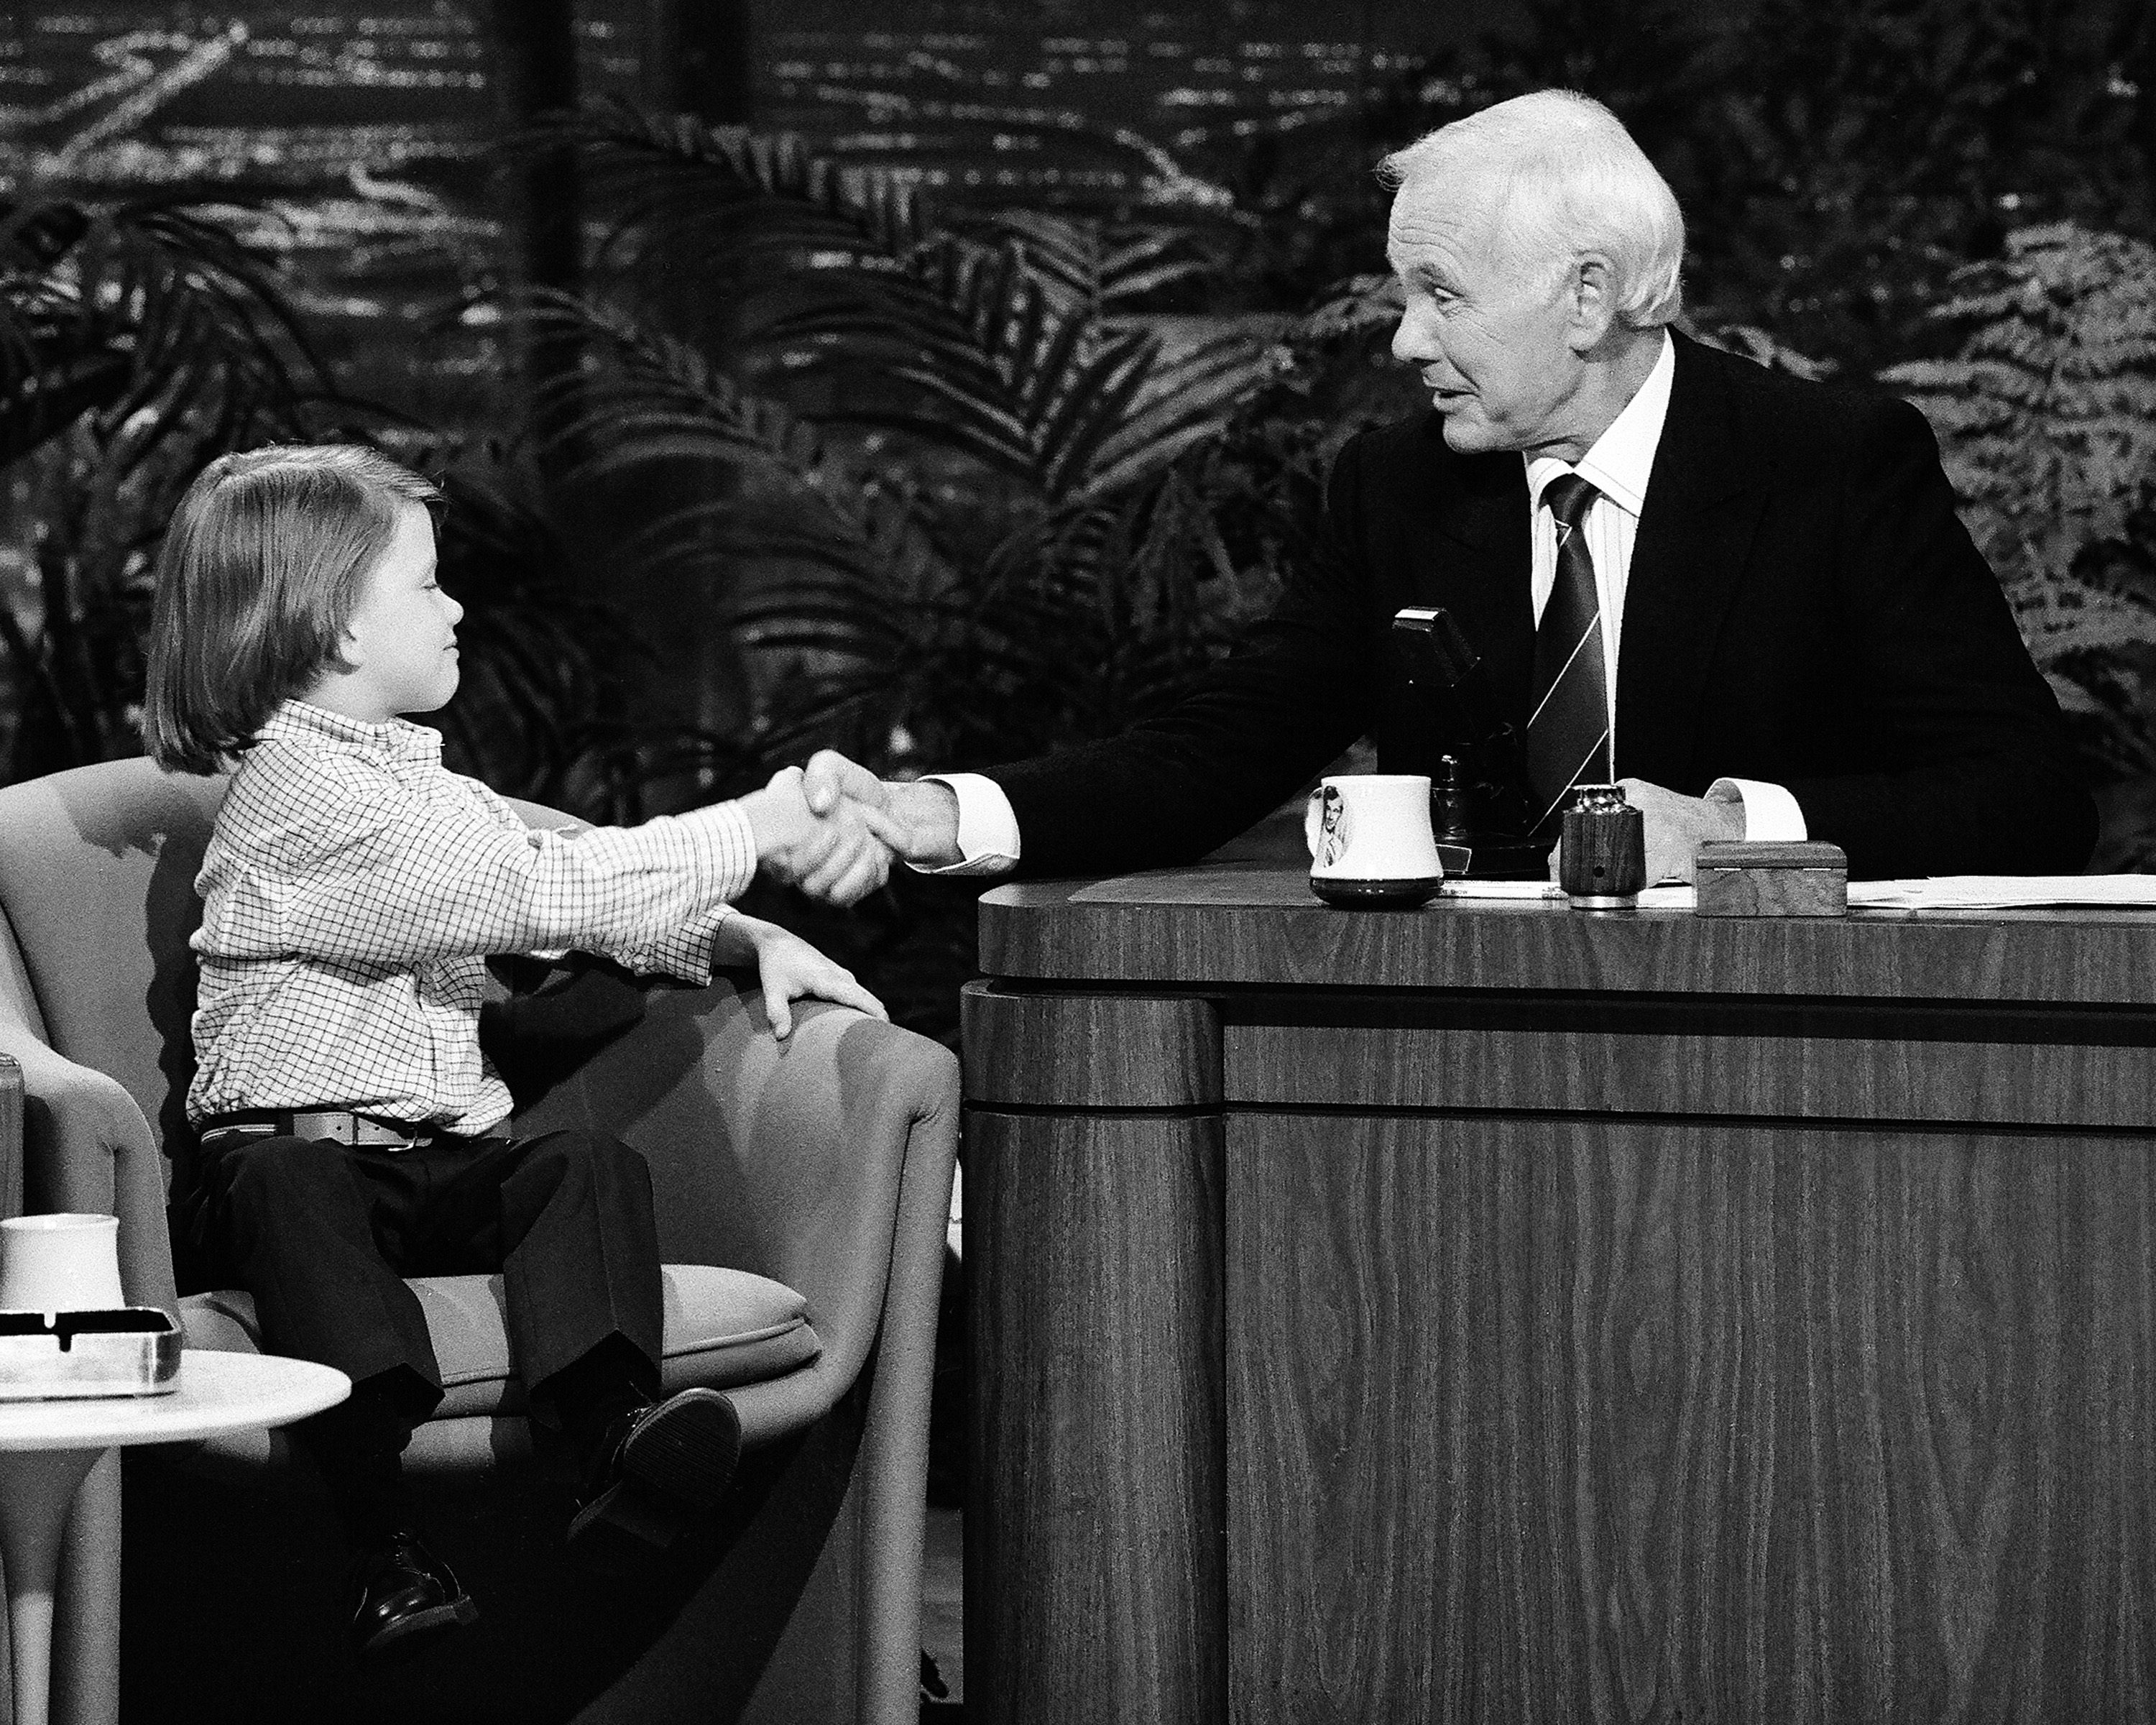 The "Problem Child" star during an interview with Johnny Carson on July 25, 1990 | Source: Getty Images